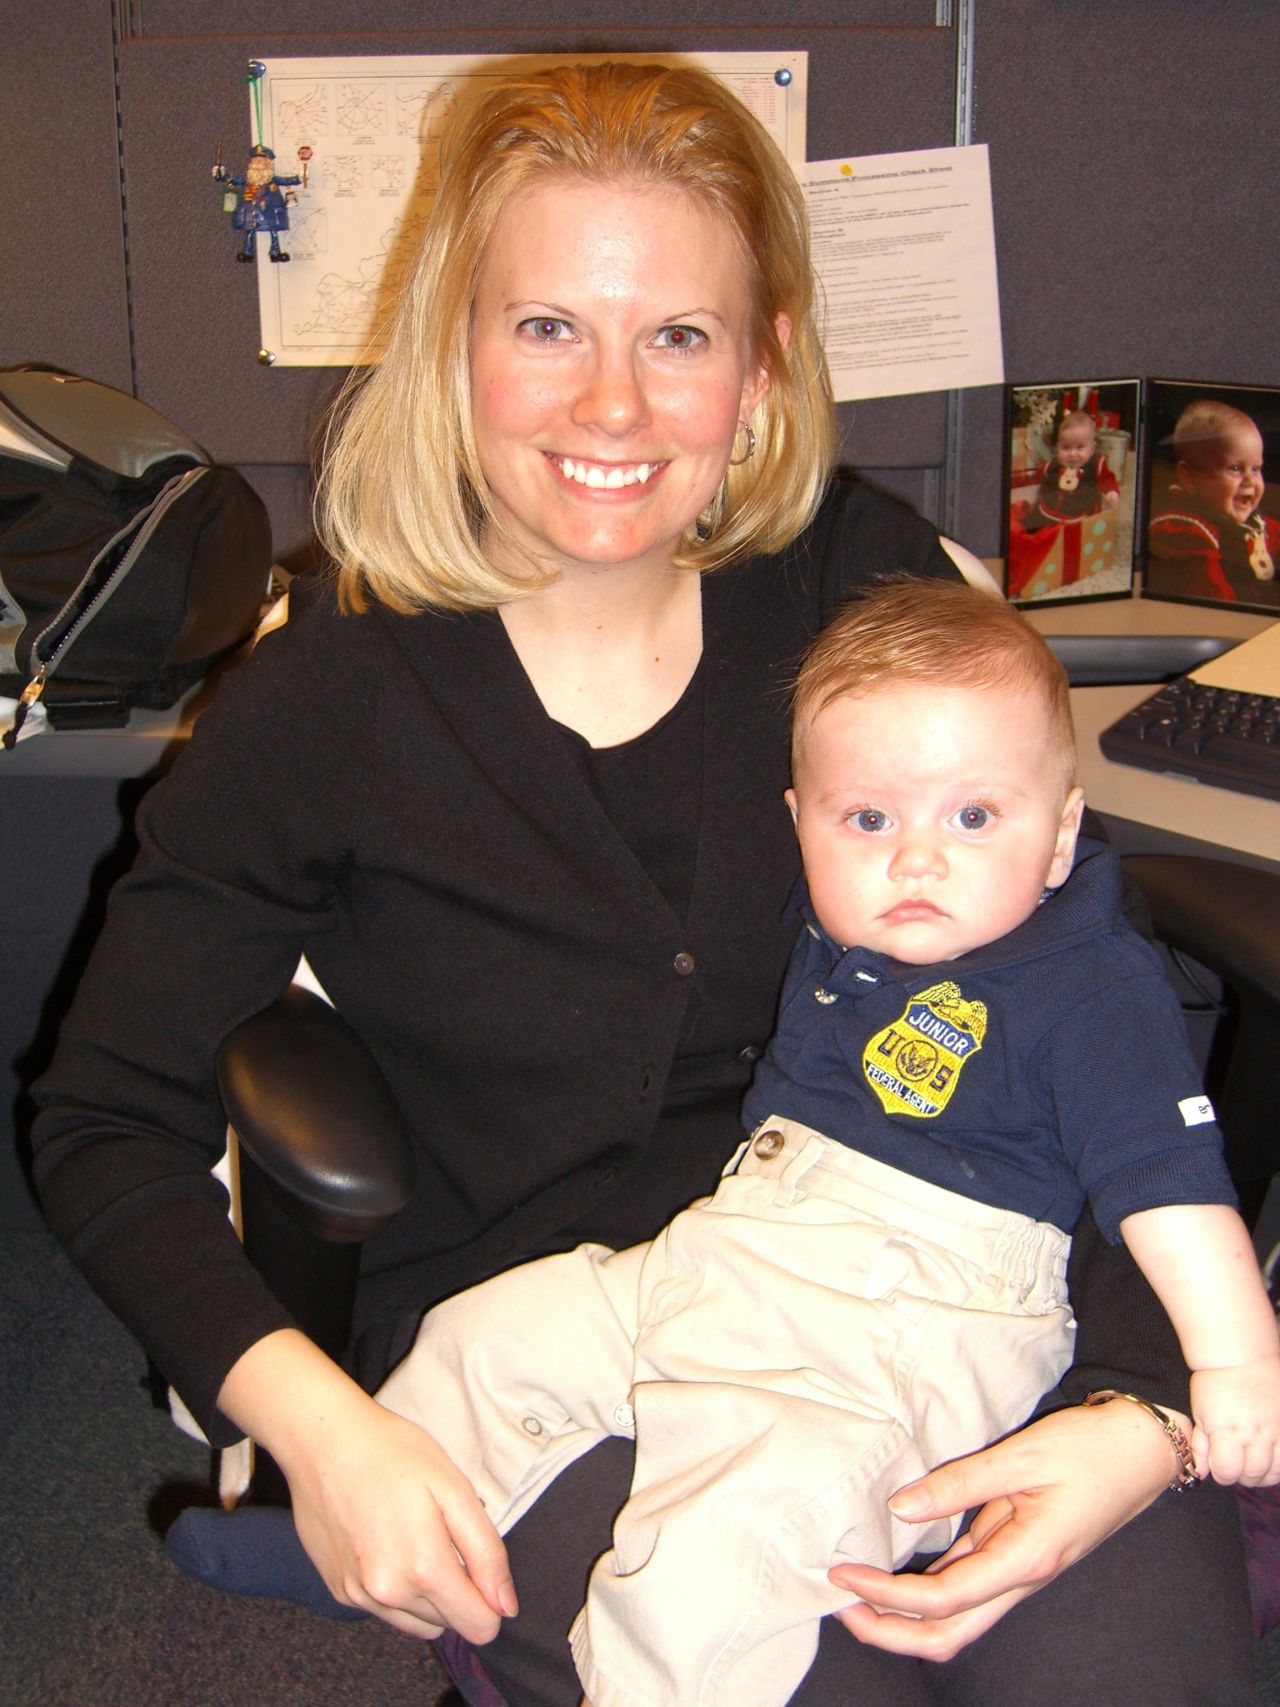 "I wish I would have taken as much time to consider the profession of motherhood as I did my other employment options," said <a href="http://ireport.cnn.com/docs/DOC-940753">Kelly Moening</a>, a law-enforcement agent whose husband stays home with their three children. 